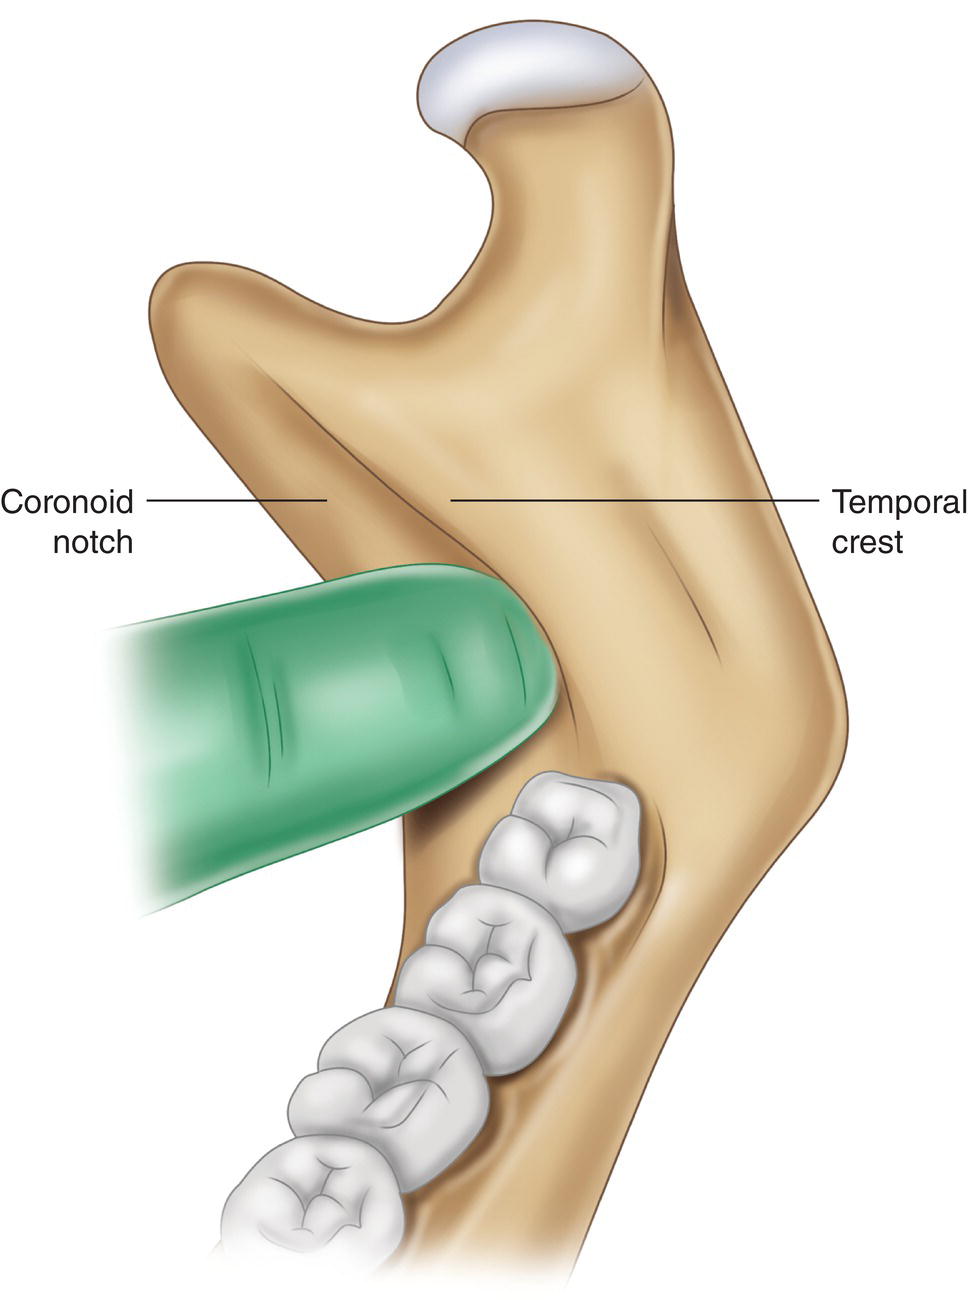 An illustration of placing the finger between the coronoid notch and temporal crest.